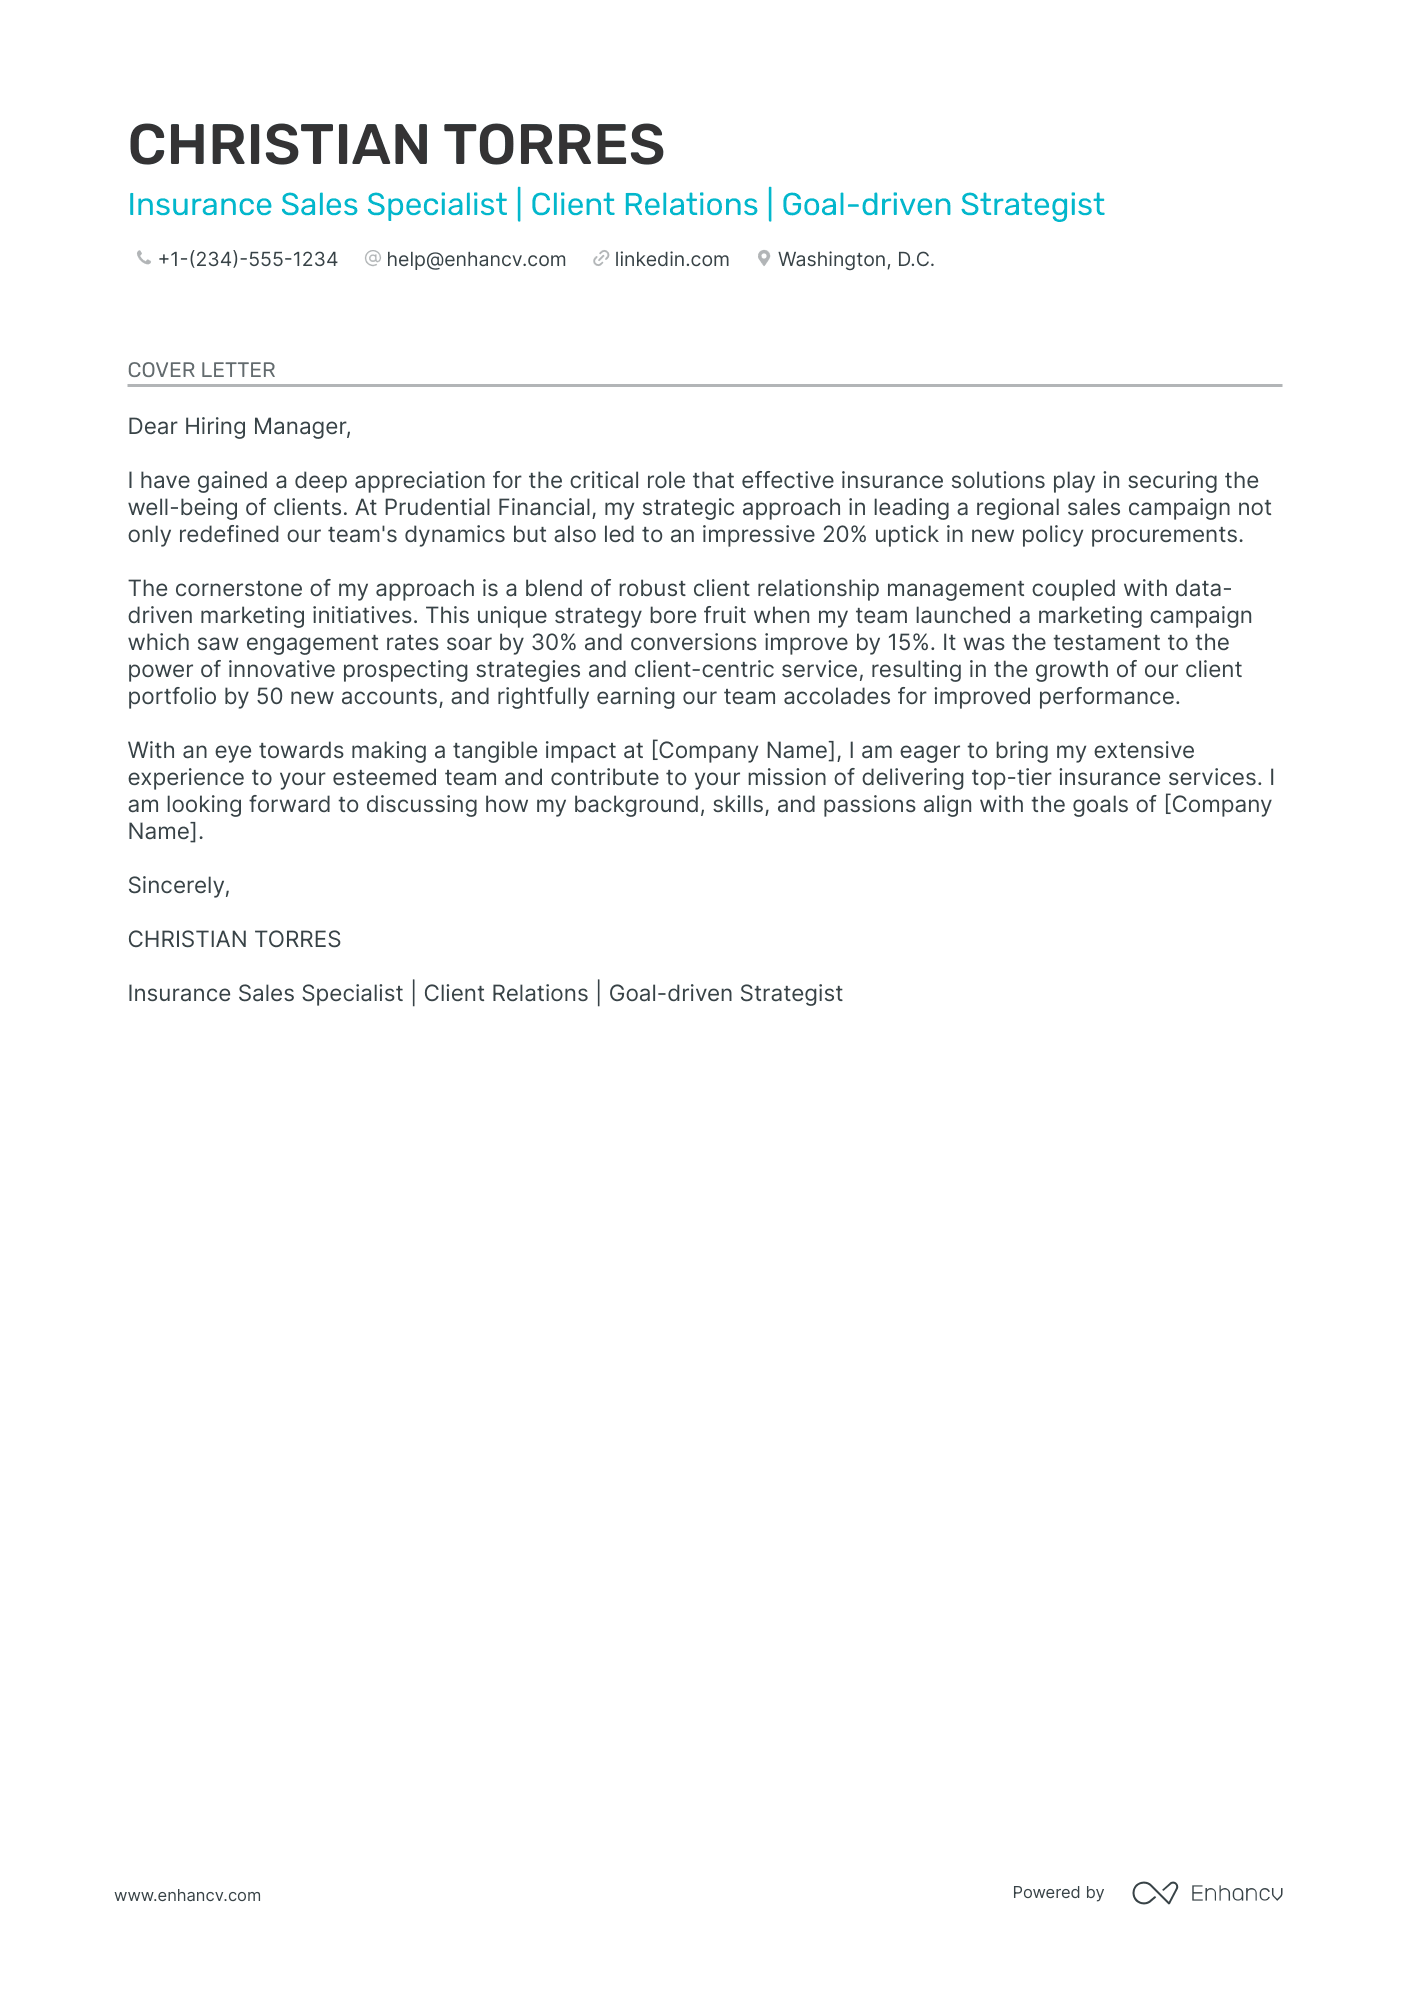 cover letter about business development